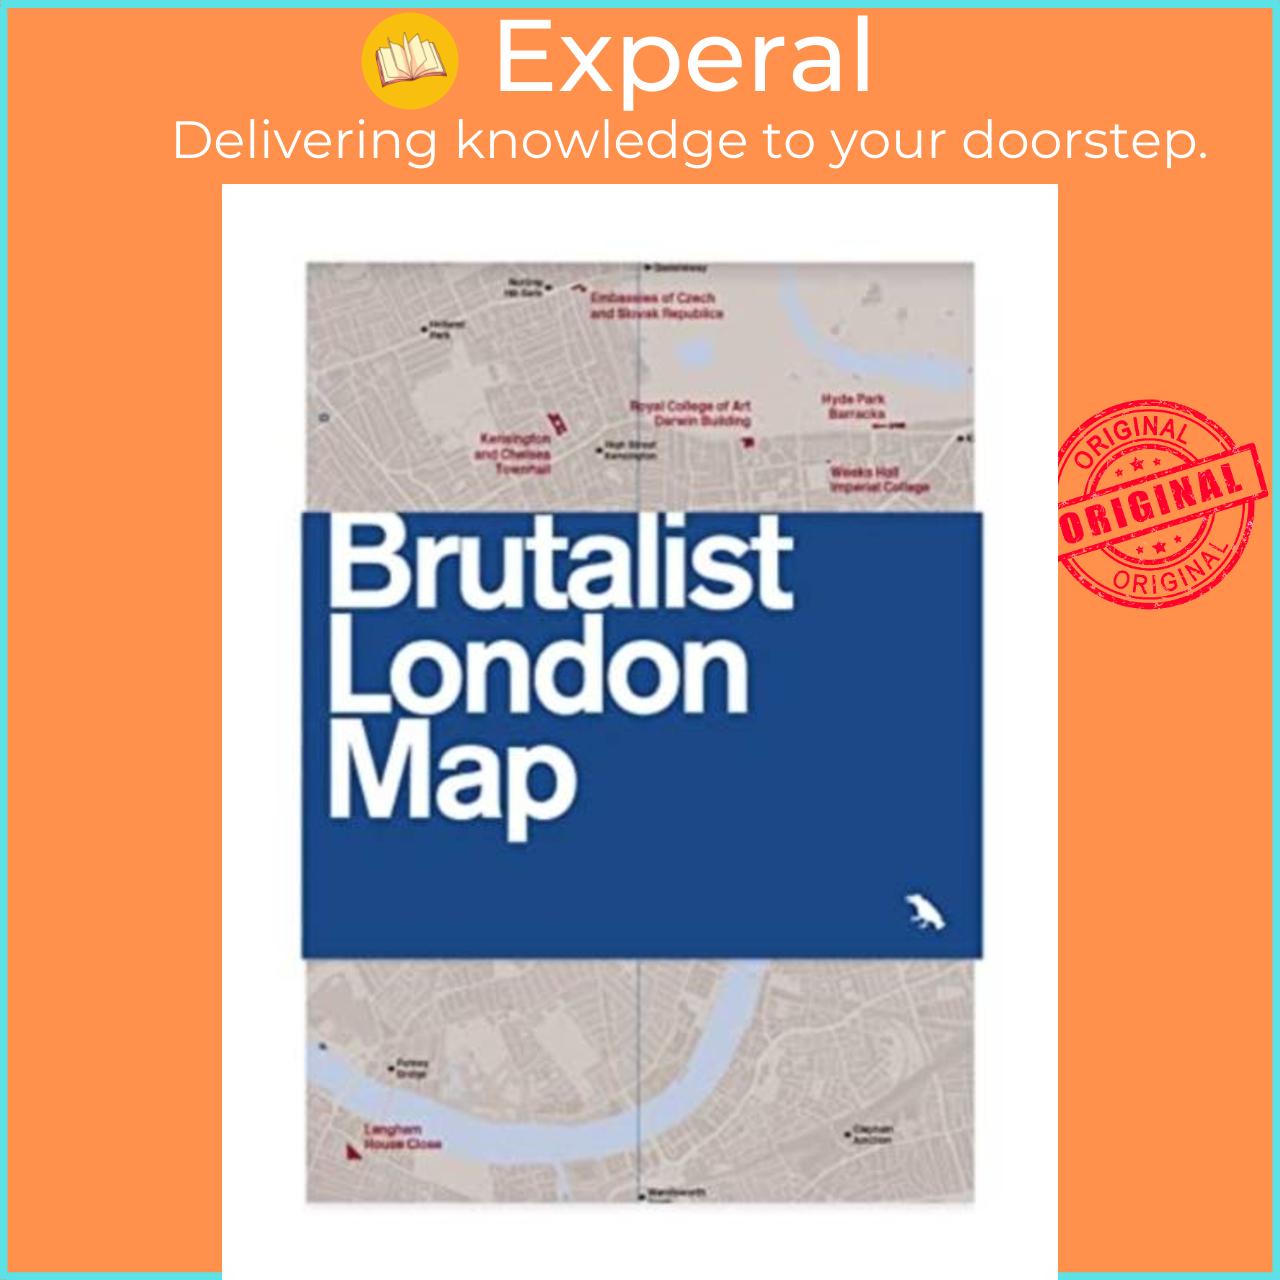 Sách - Brutalist London Map - Guide to Brutalist architecture in London - 2nd by Derek Lamberton (UK edition, paperback)